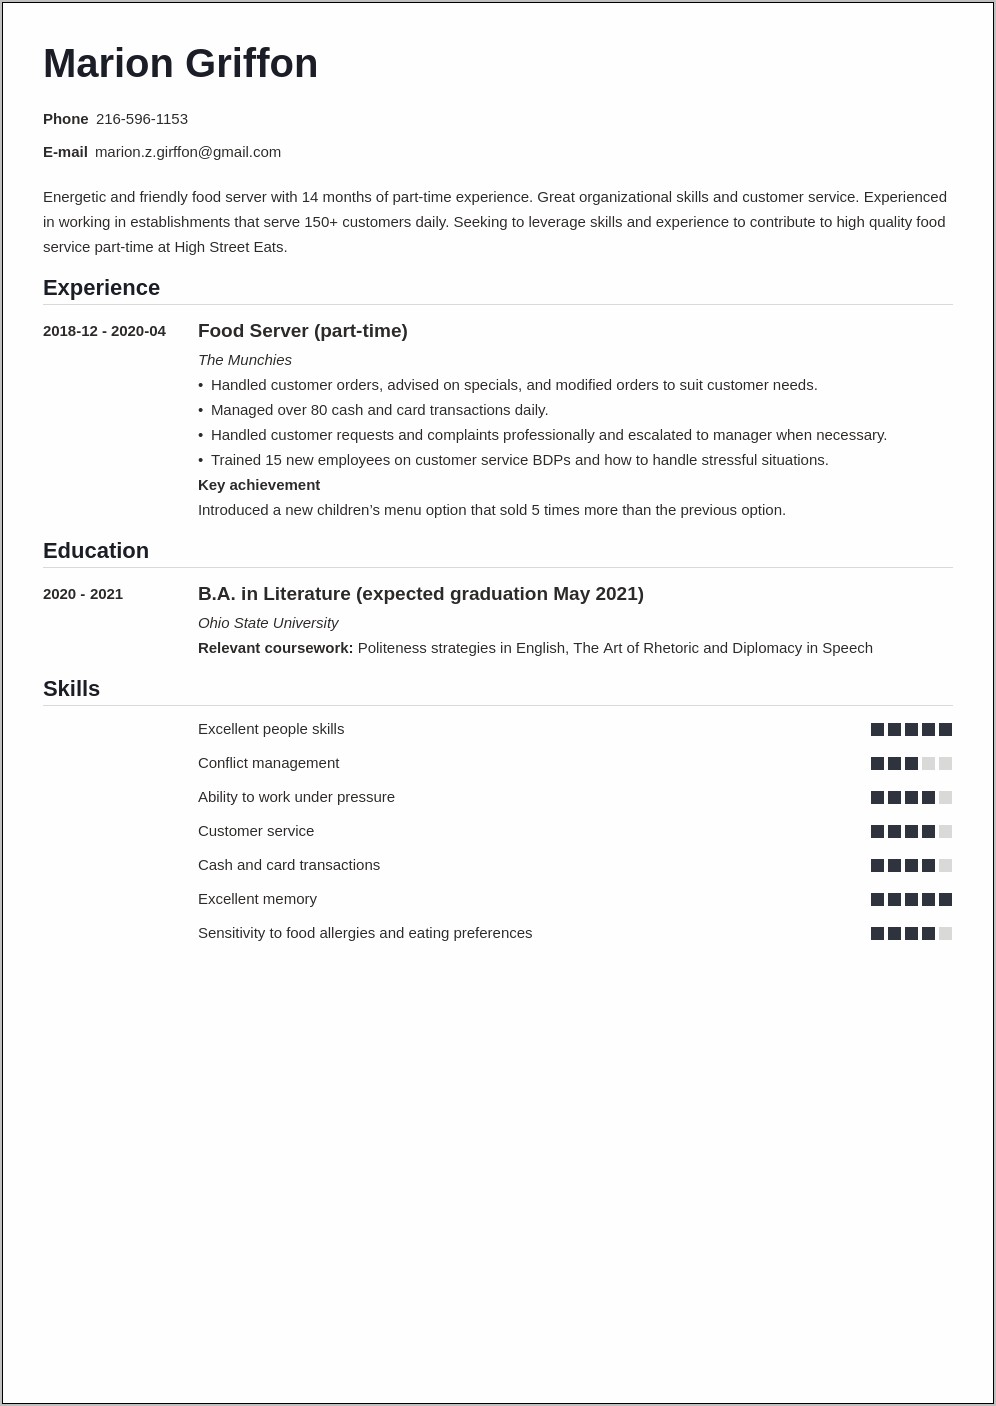 Resume Objective Part Time Job College Student